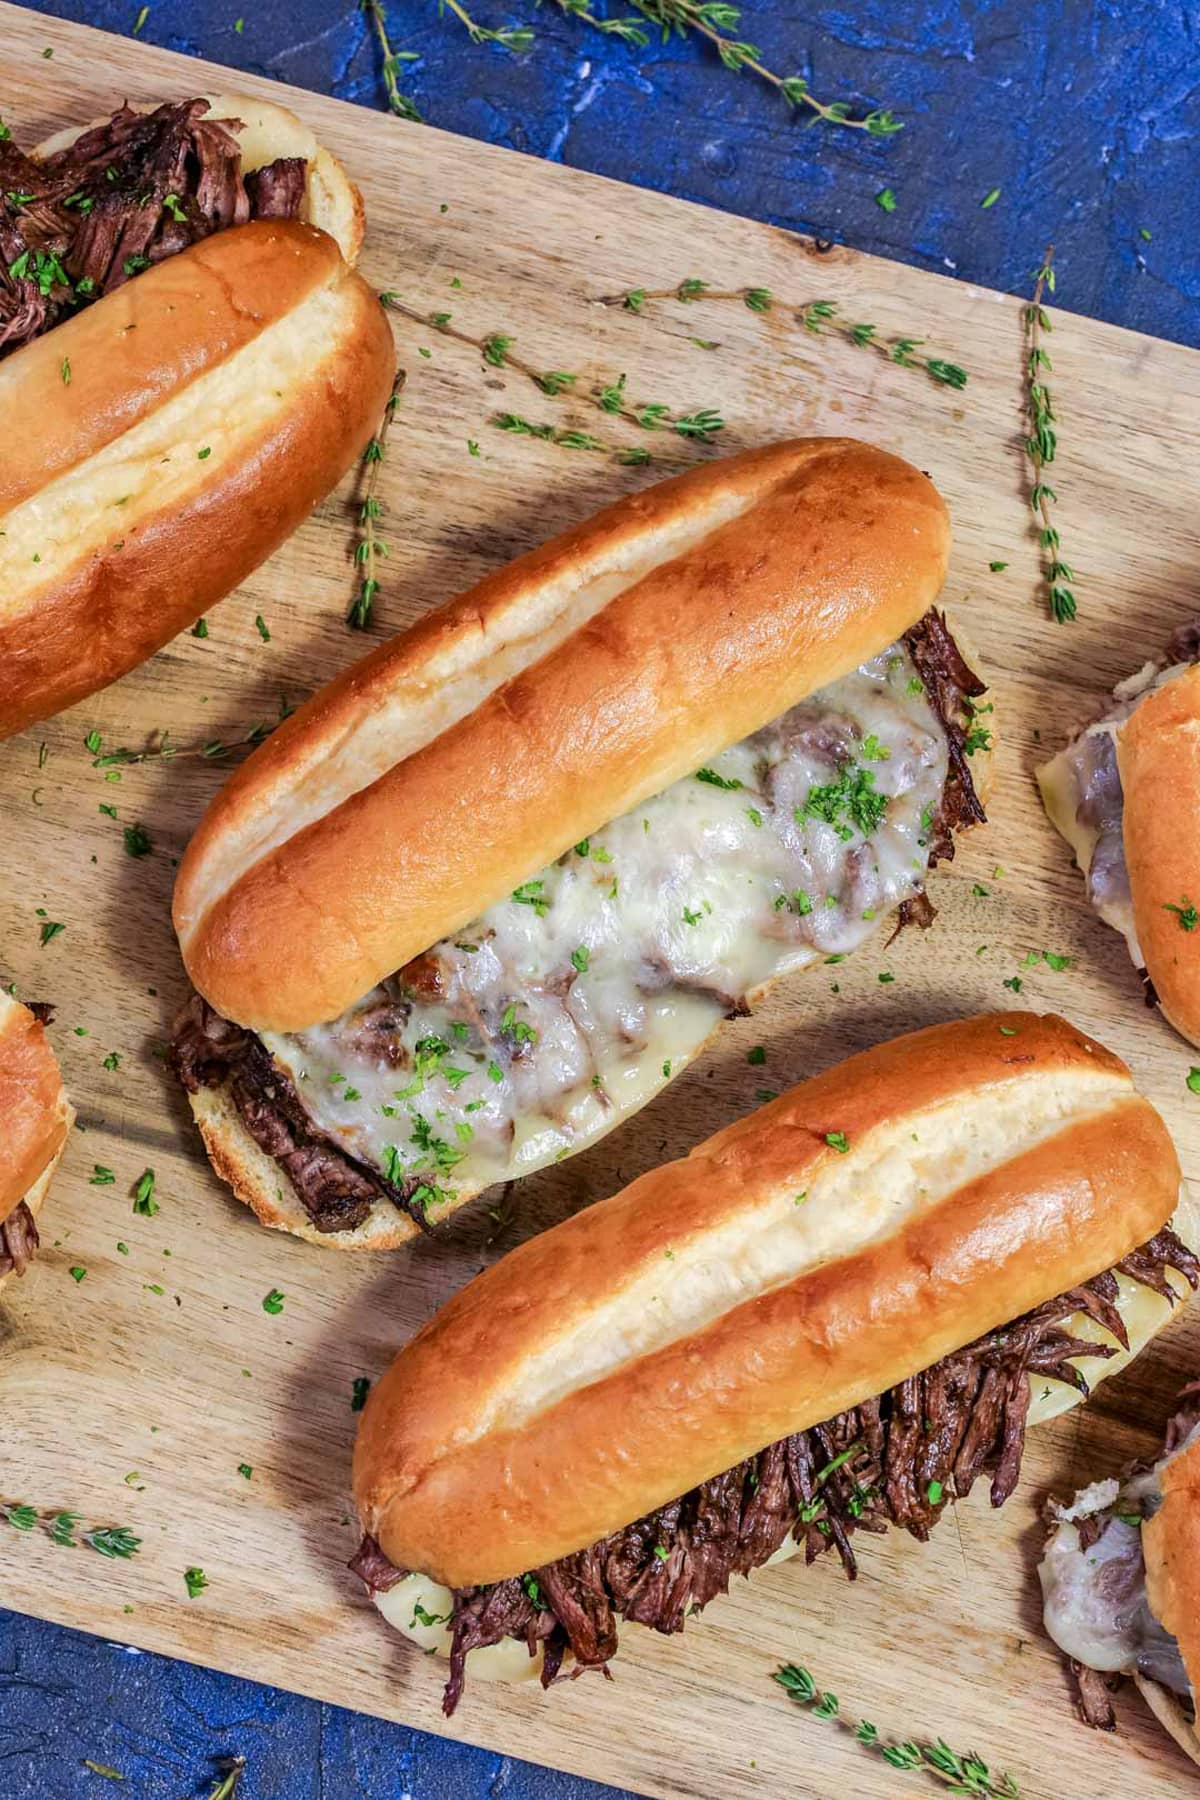 Overhead view of French dip sandwiches on a cutting board